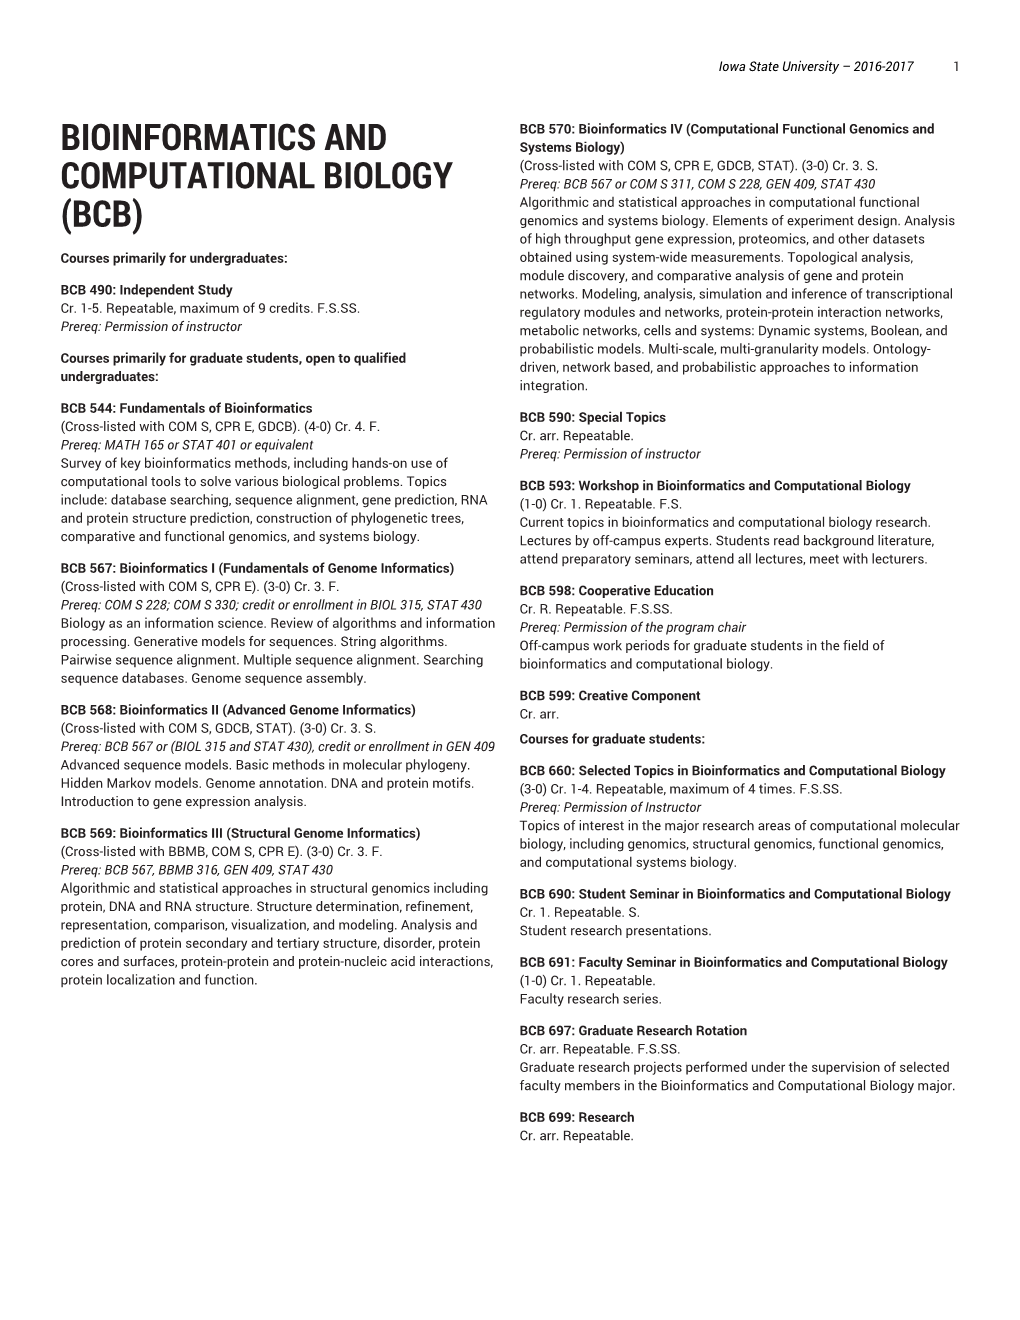 Bioinformatics and Computational Biology Include: Database Searching, Sequence Alignment, Gene Prediction, RNA (1-0) Cr